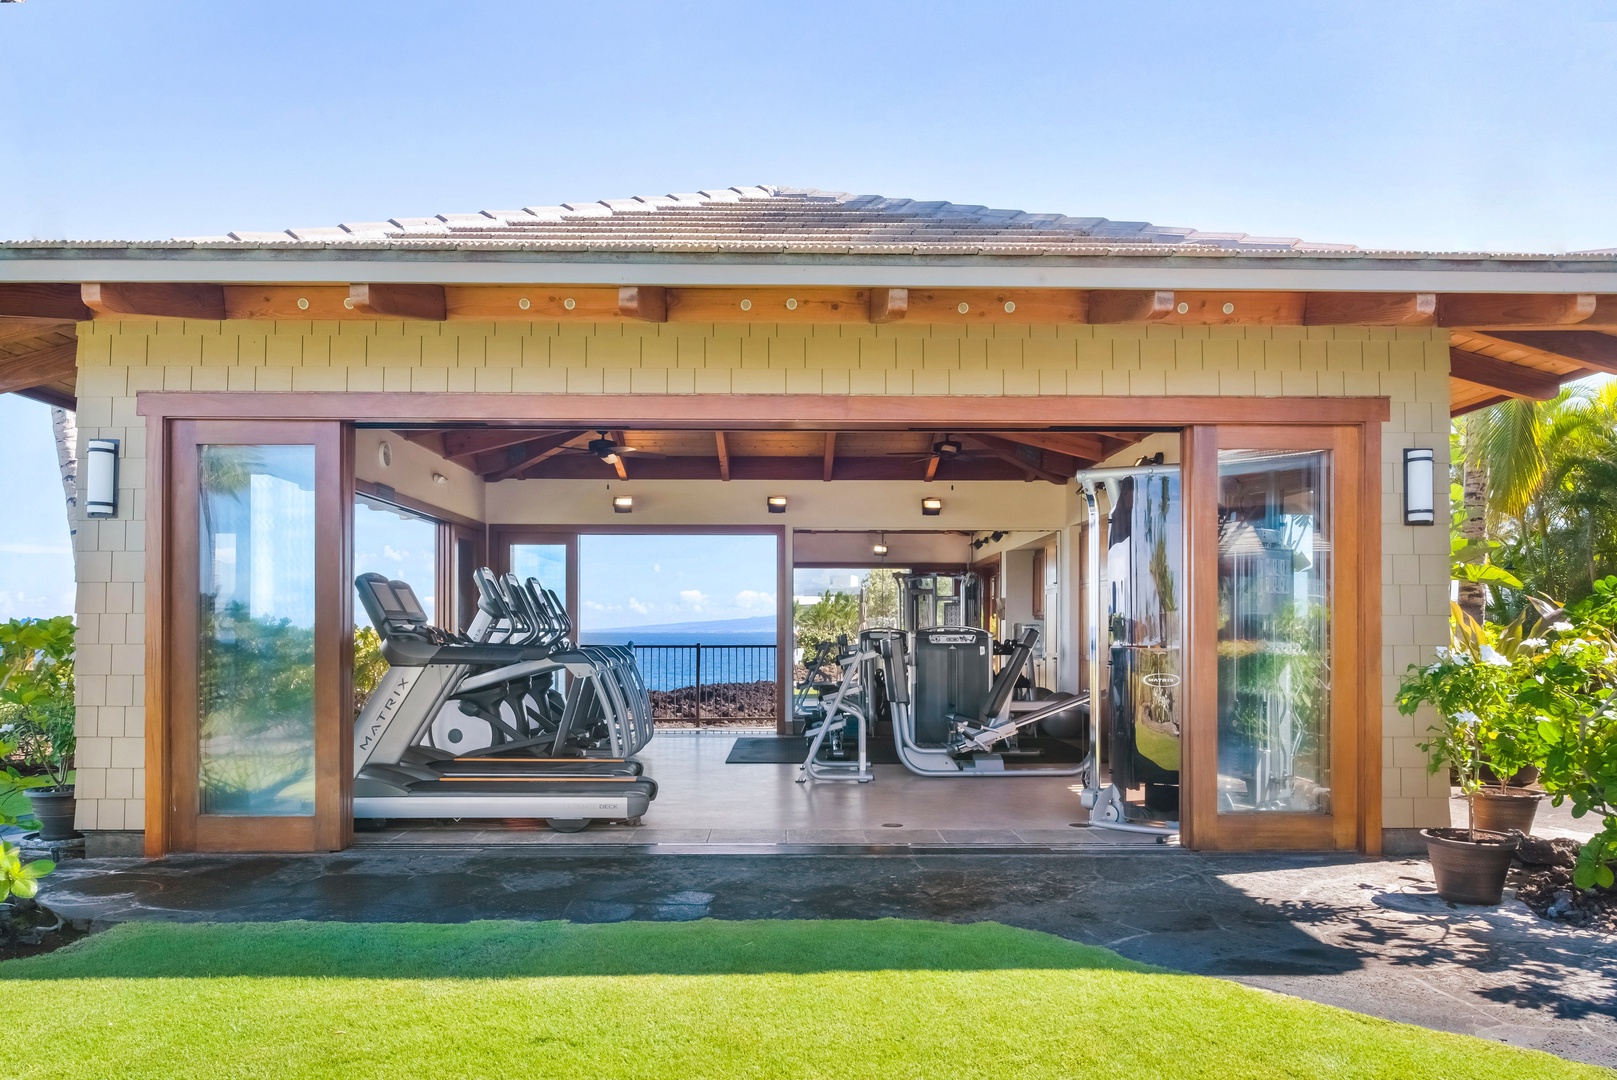 Waikoloa Vacation Rentals, 3BD Hali'i Kai (12G) at Waikoloa Resort - Hali'i Kai's private fitness center perched on the cliffs overlooking the ocean